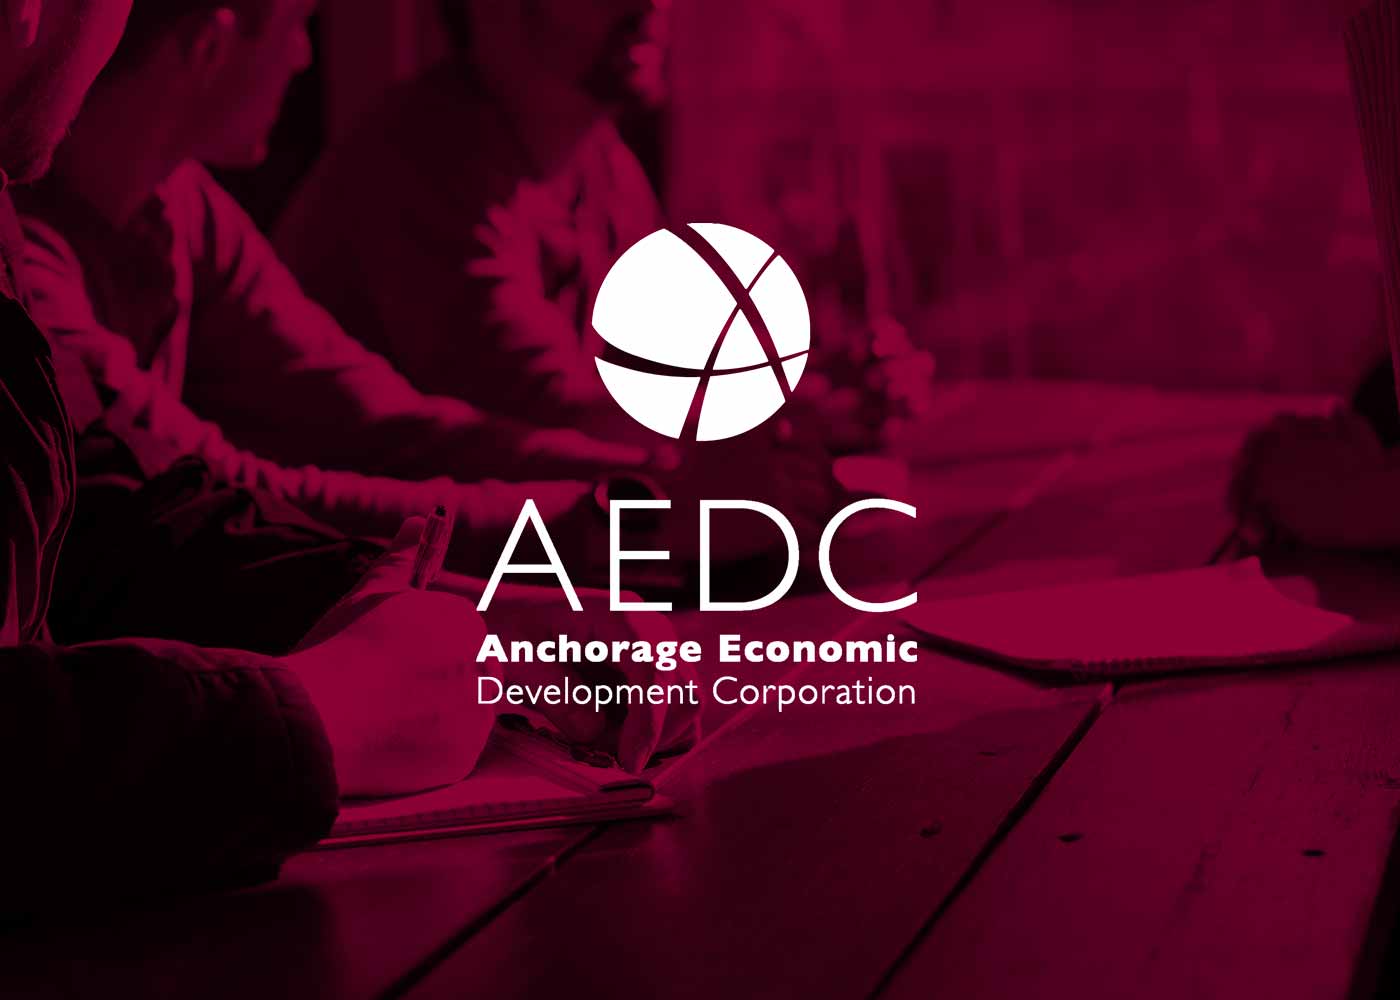 Anchorage Economic Development Corporation Announces Stake of 50M FLY Token